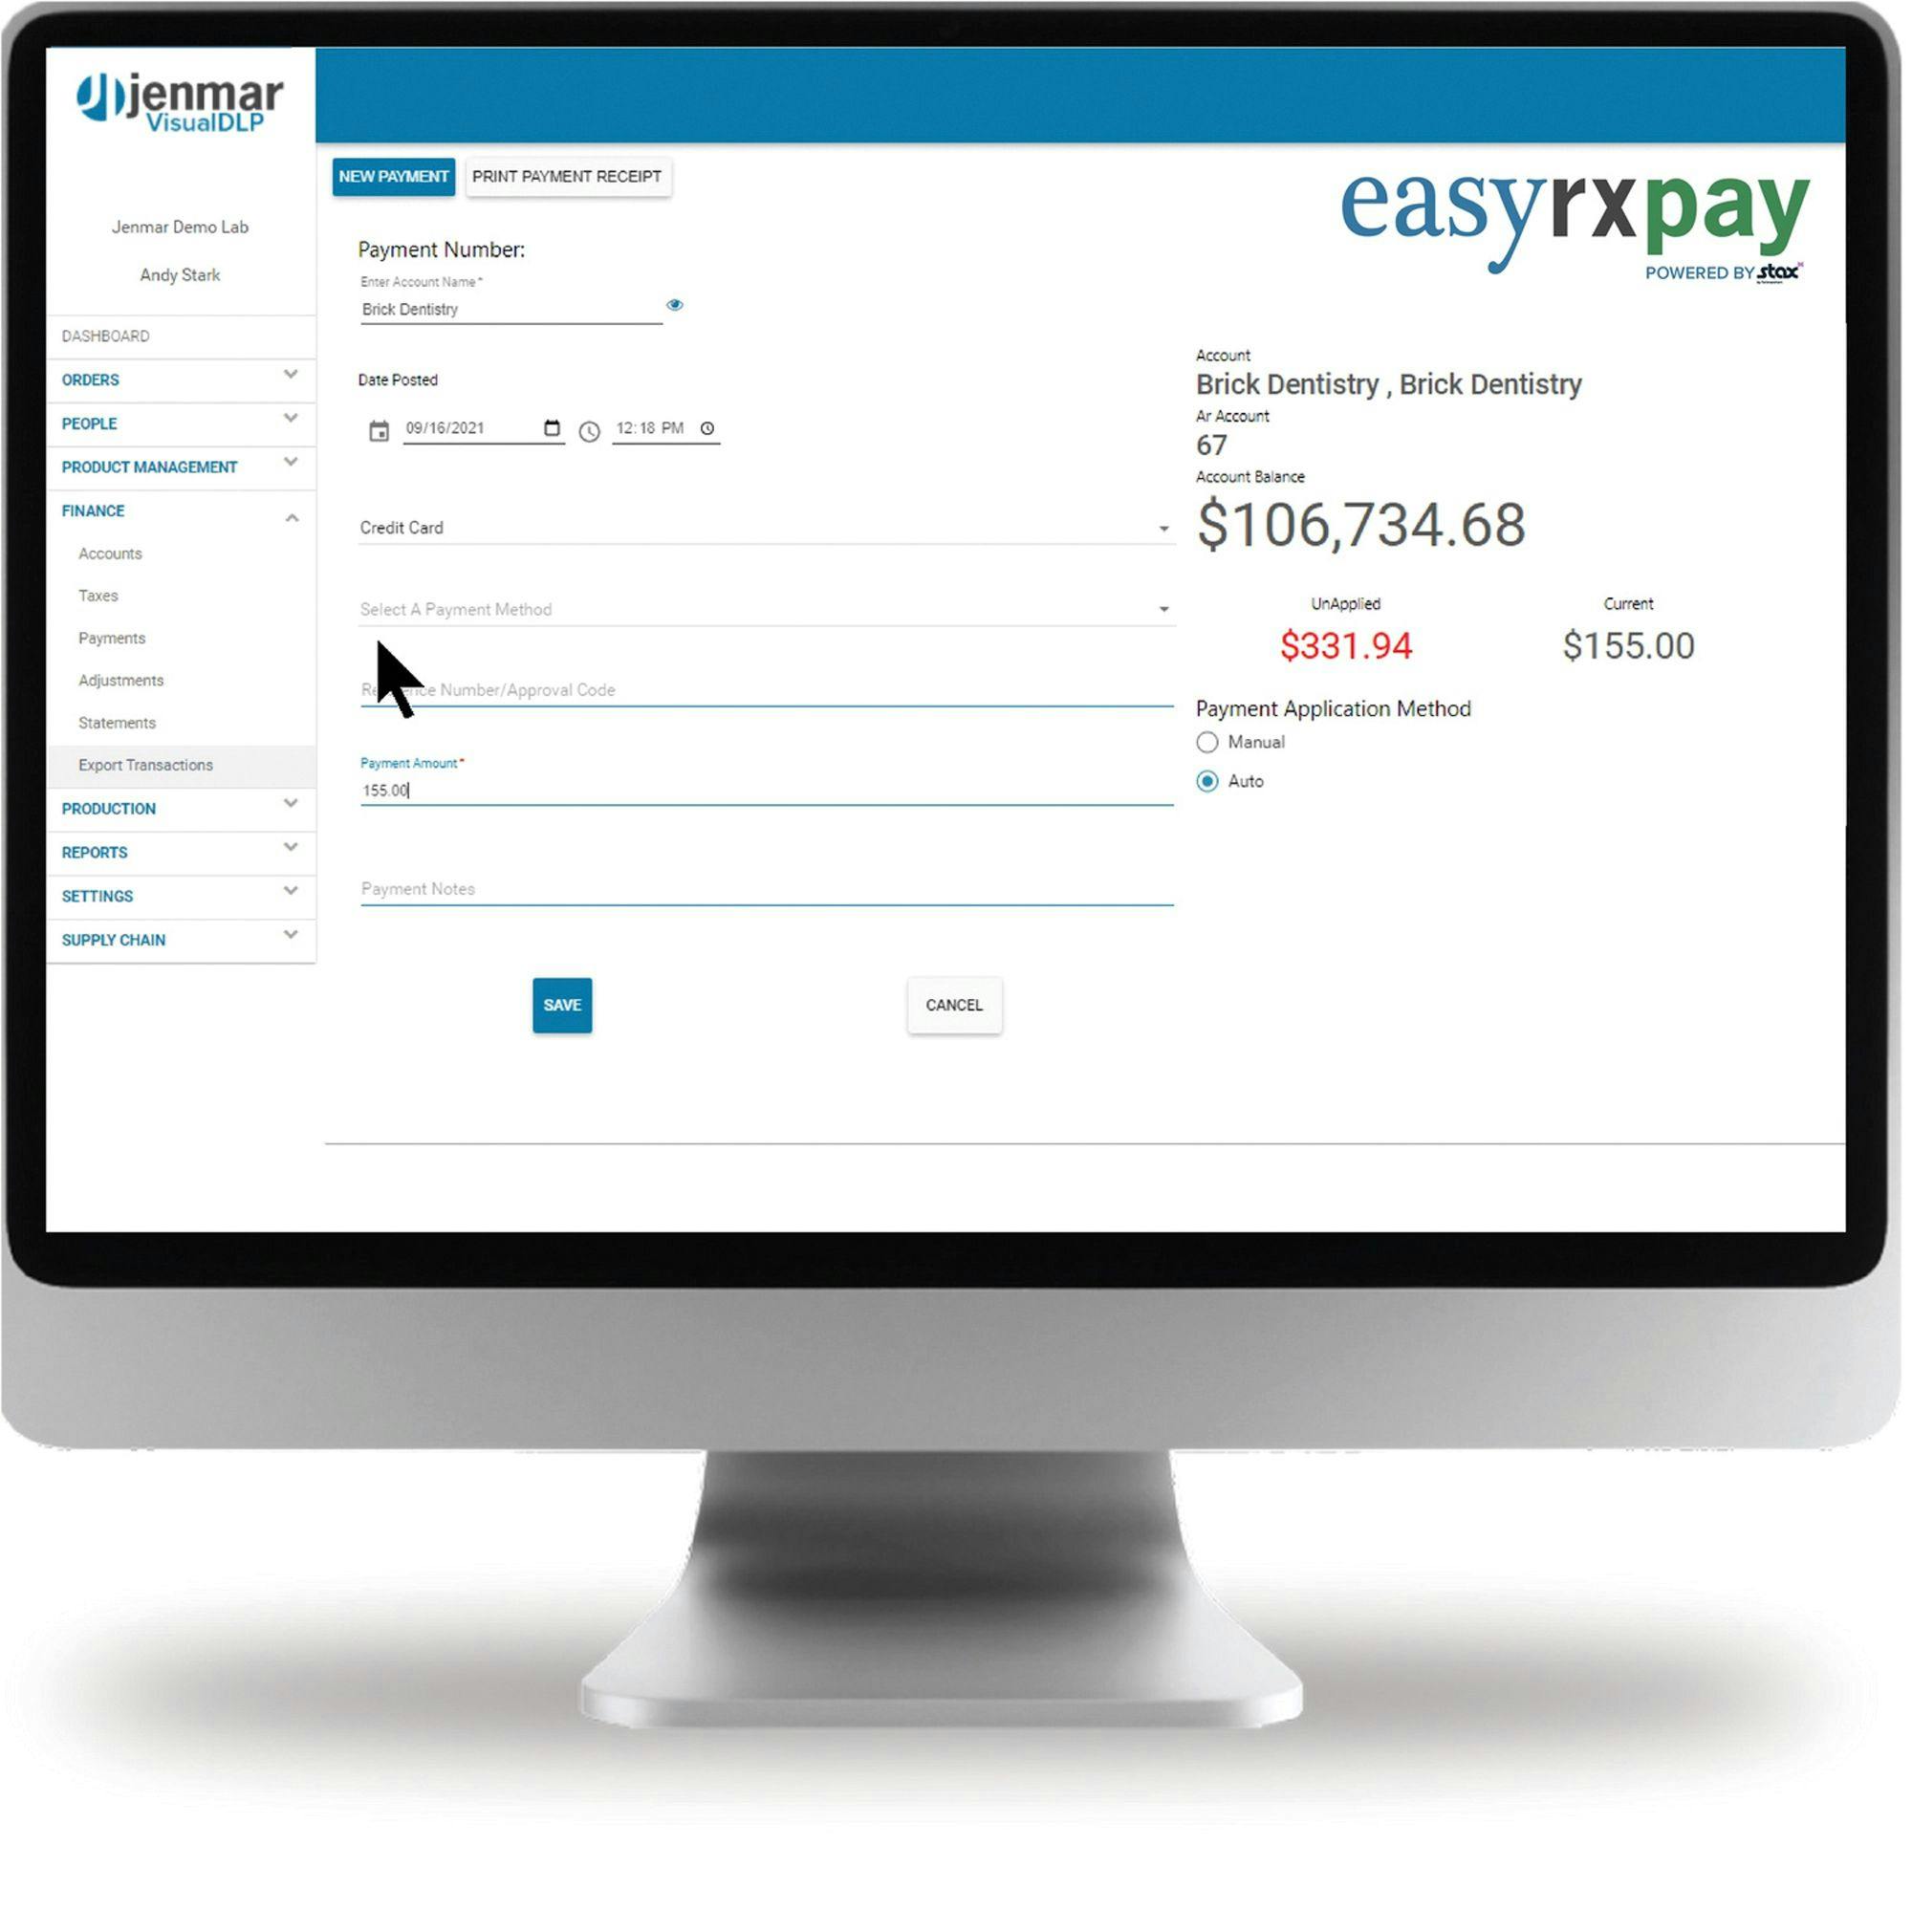 The EasyRX Pay solution is designed to offer payment options between lab and organization safely and conveniently while streamlining operations. EasyRX Pay will offer dental labs integrated electronic payments and other benefits, including a streamlined experience with digital payments integrated directly into the Jenmar VisualDLP platform.